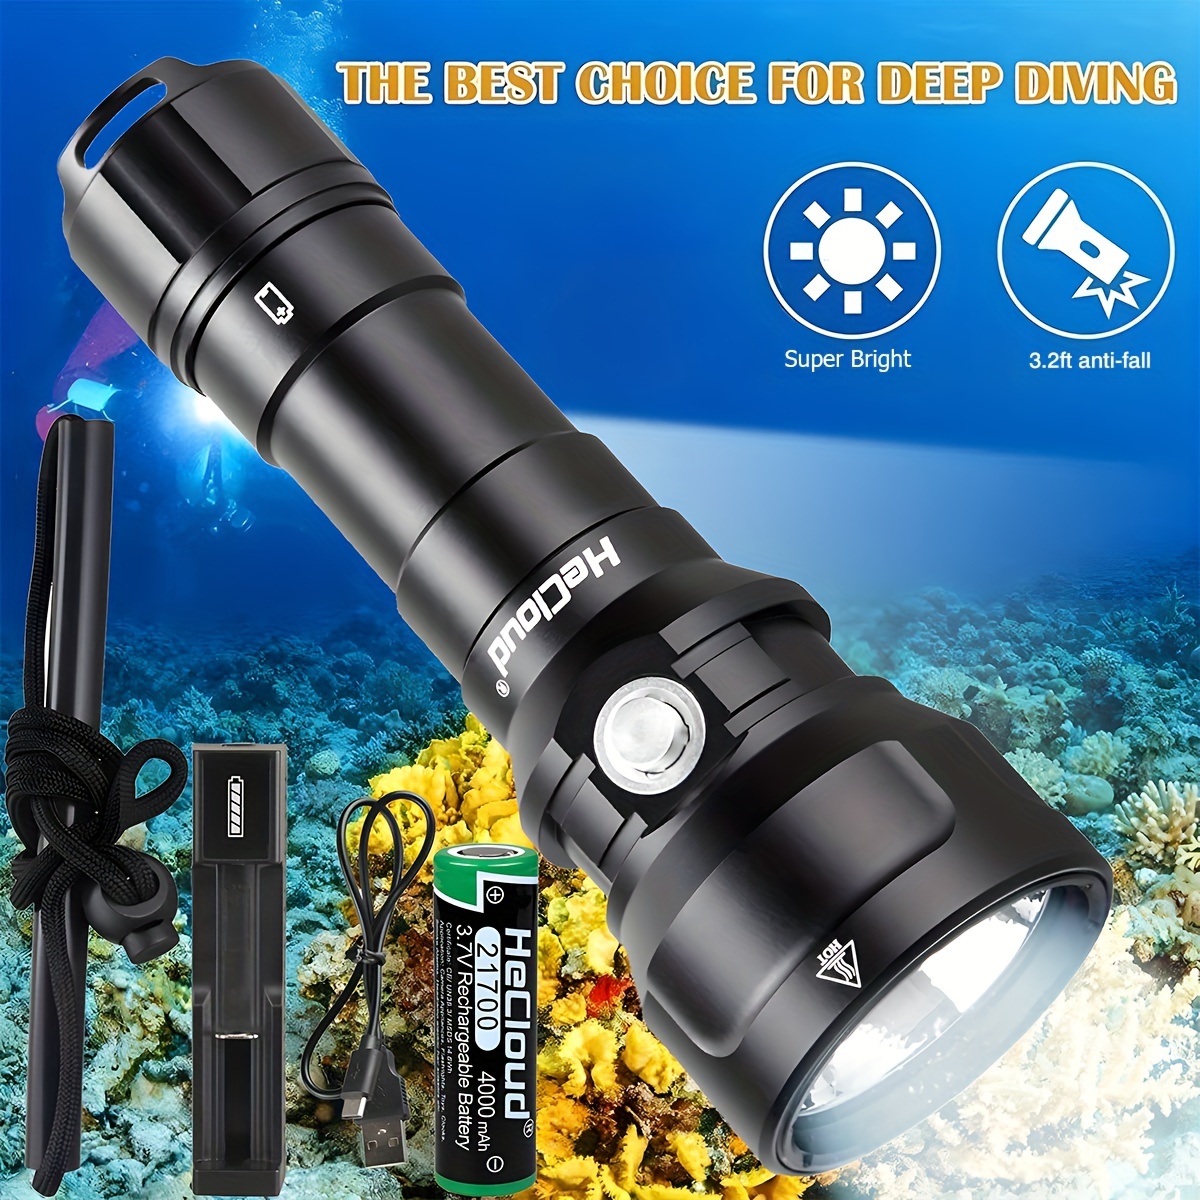 

1pc High Lumens Pm70 Diving Flashlight, Underwater 492ft Professional Snorkeling Lights, Super Bright Led Diving Torch, Rechargeable 21700 Battery, Usb Charger For Underwater Sports